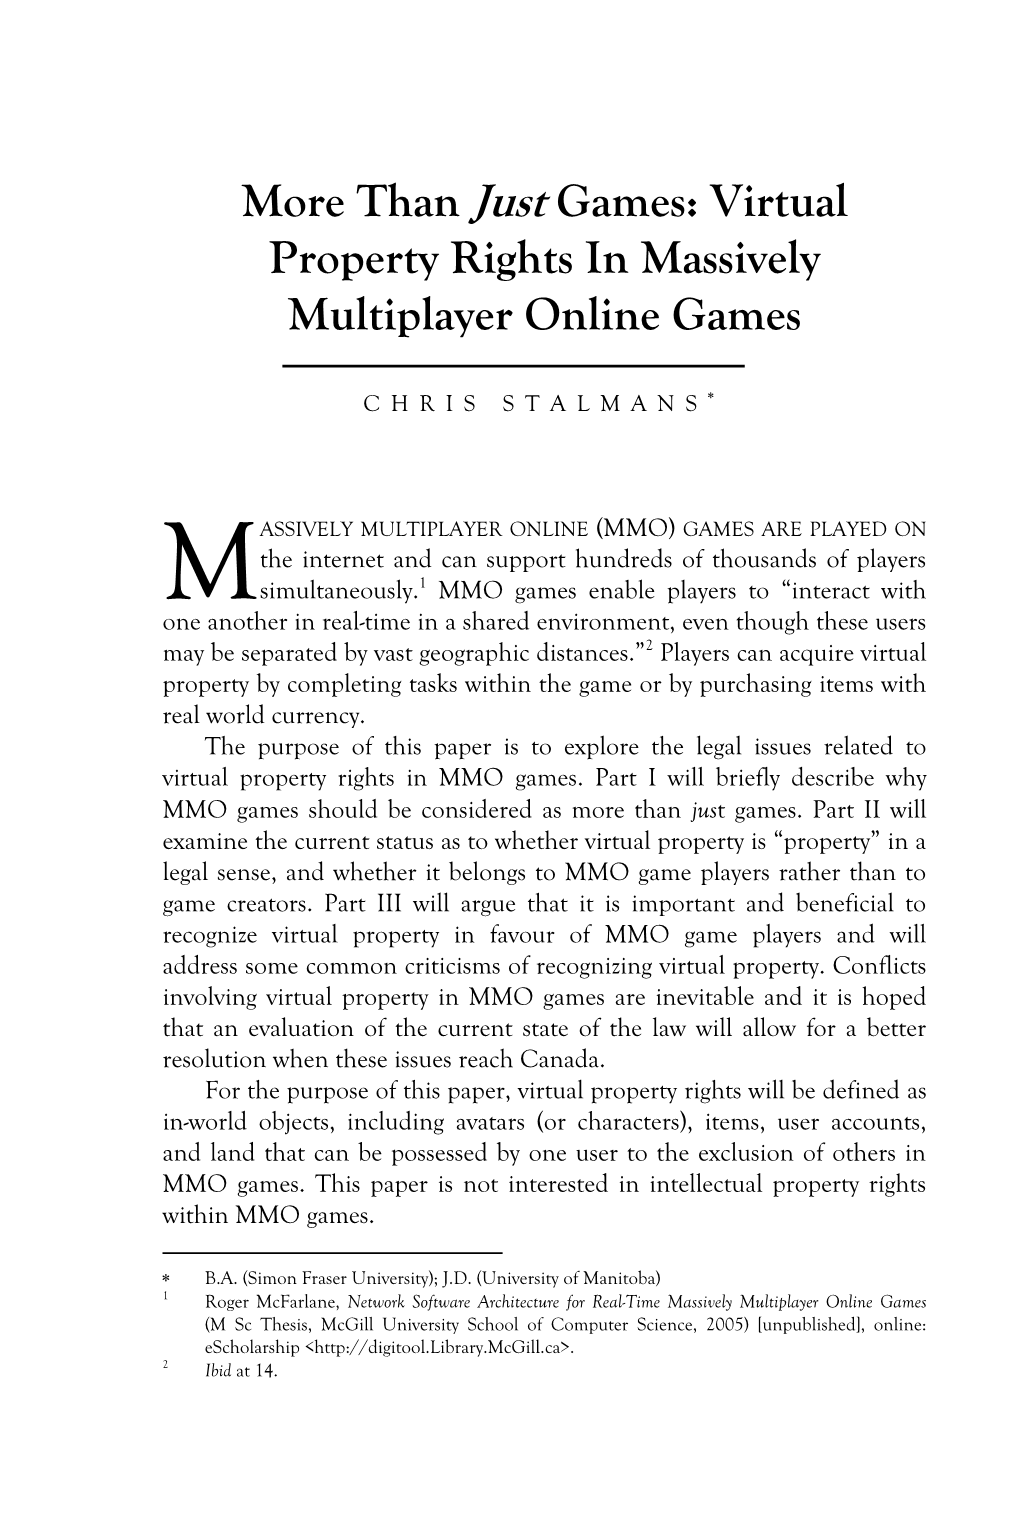 Virtual Property Rights in Massively Online Games